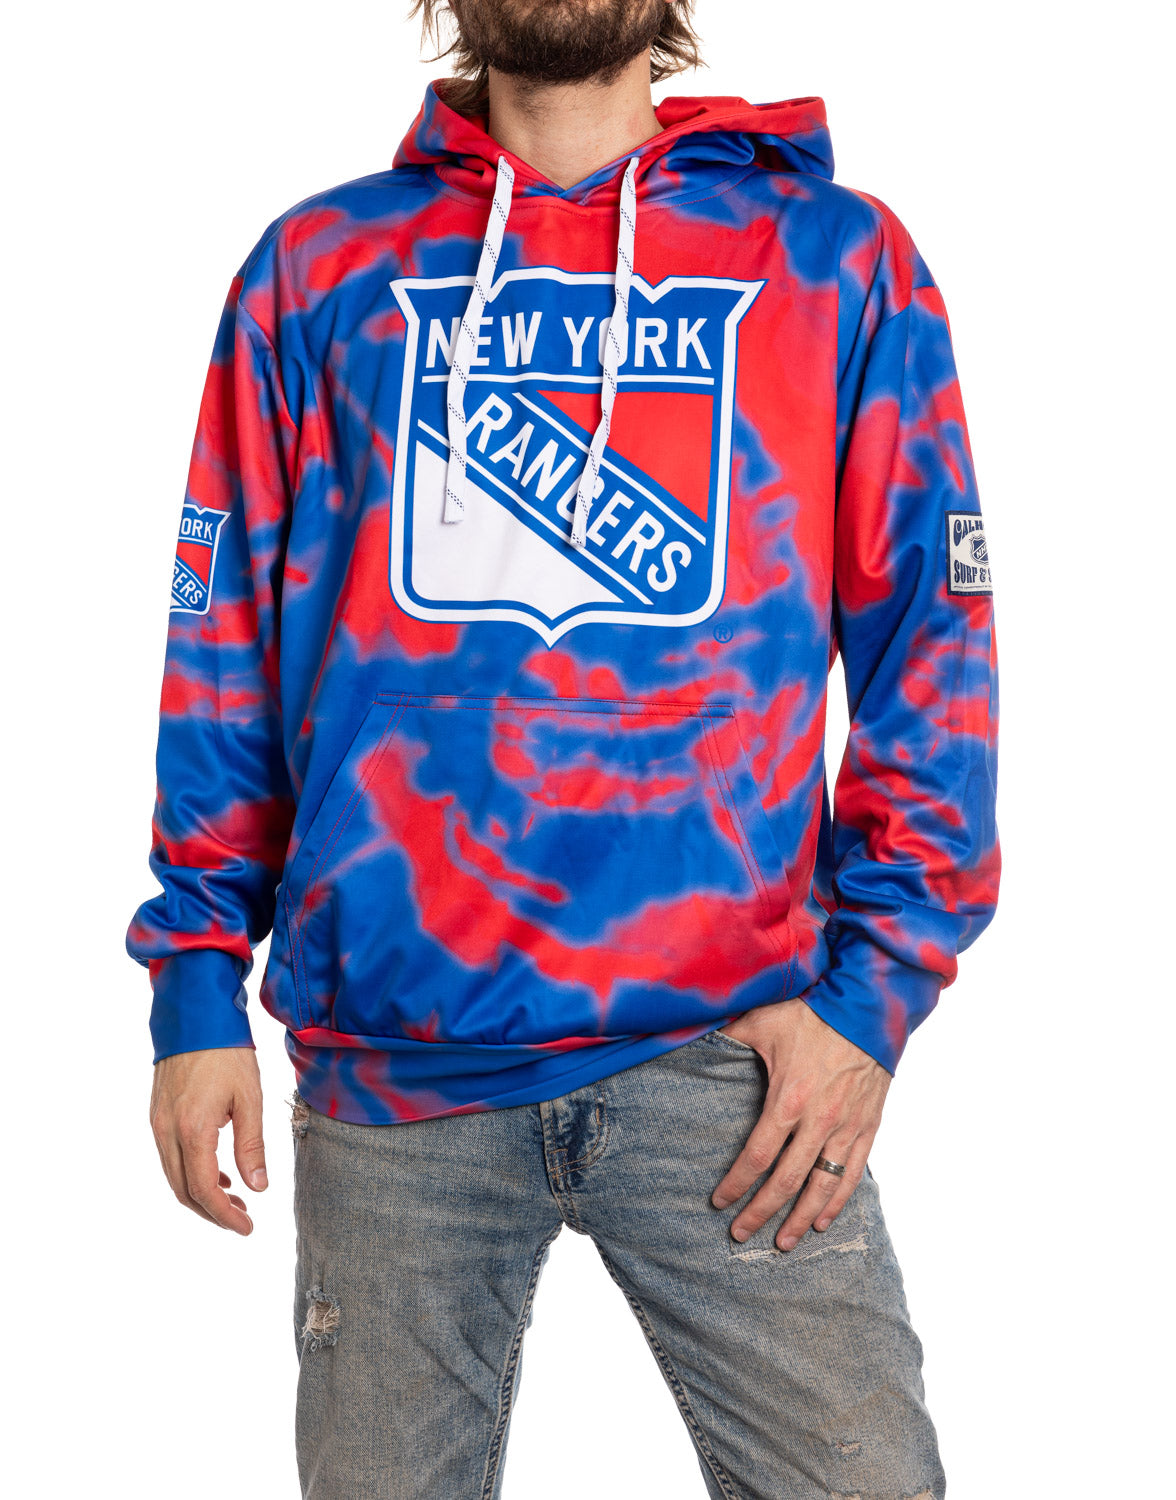 New York Rangers NHL Tie Dye Sublimation Pullover Hoodie